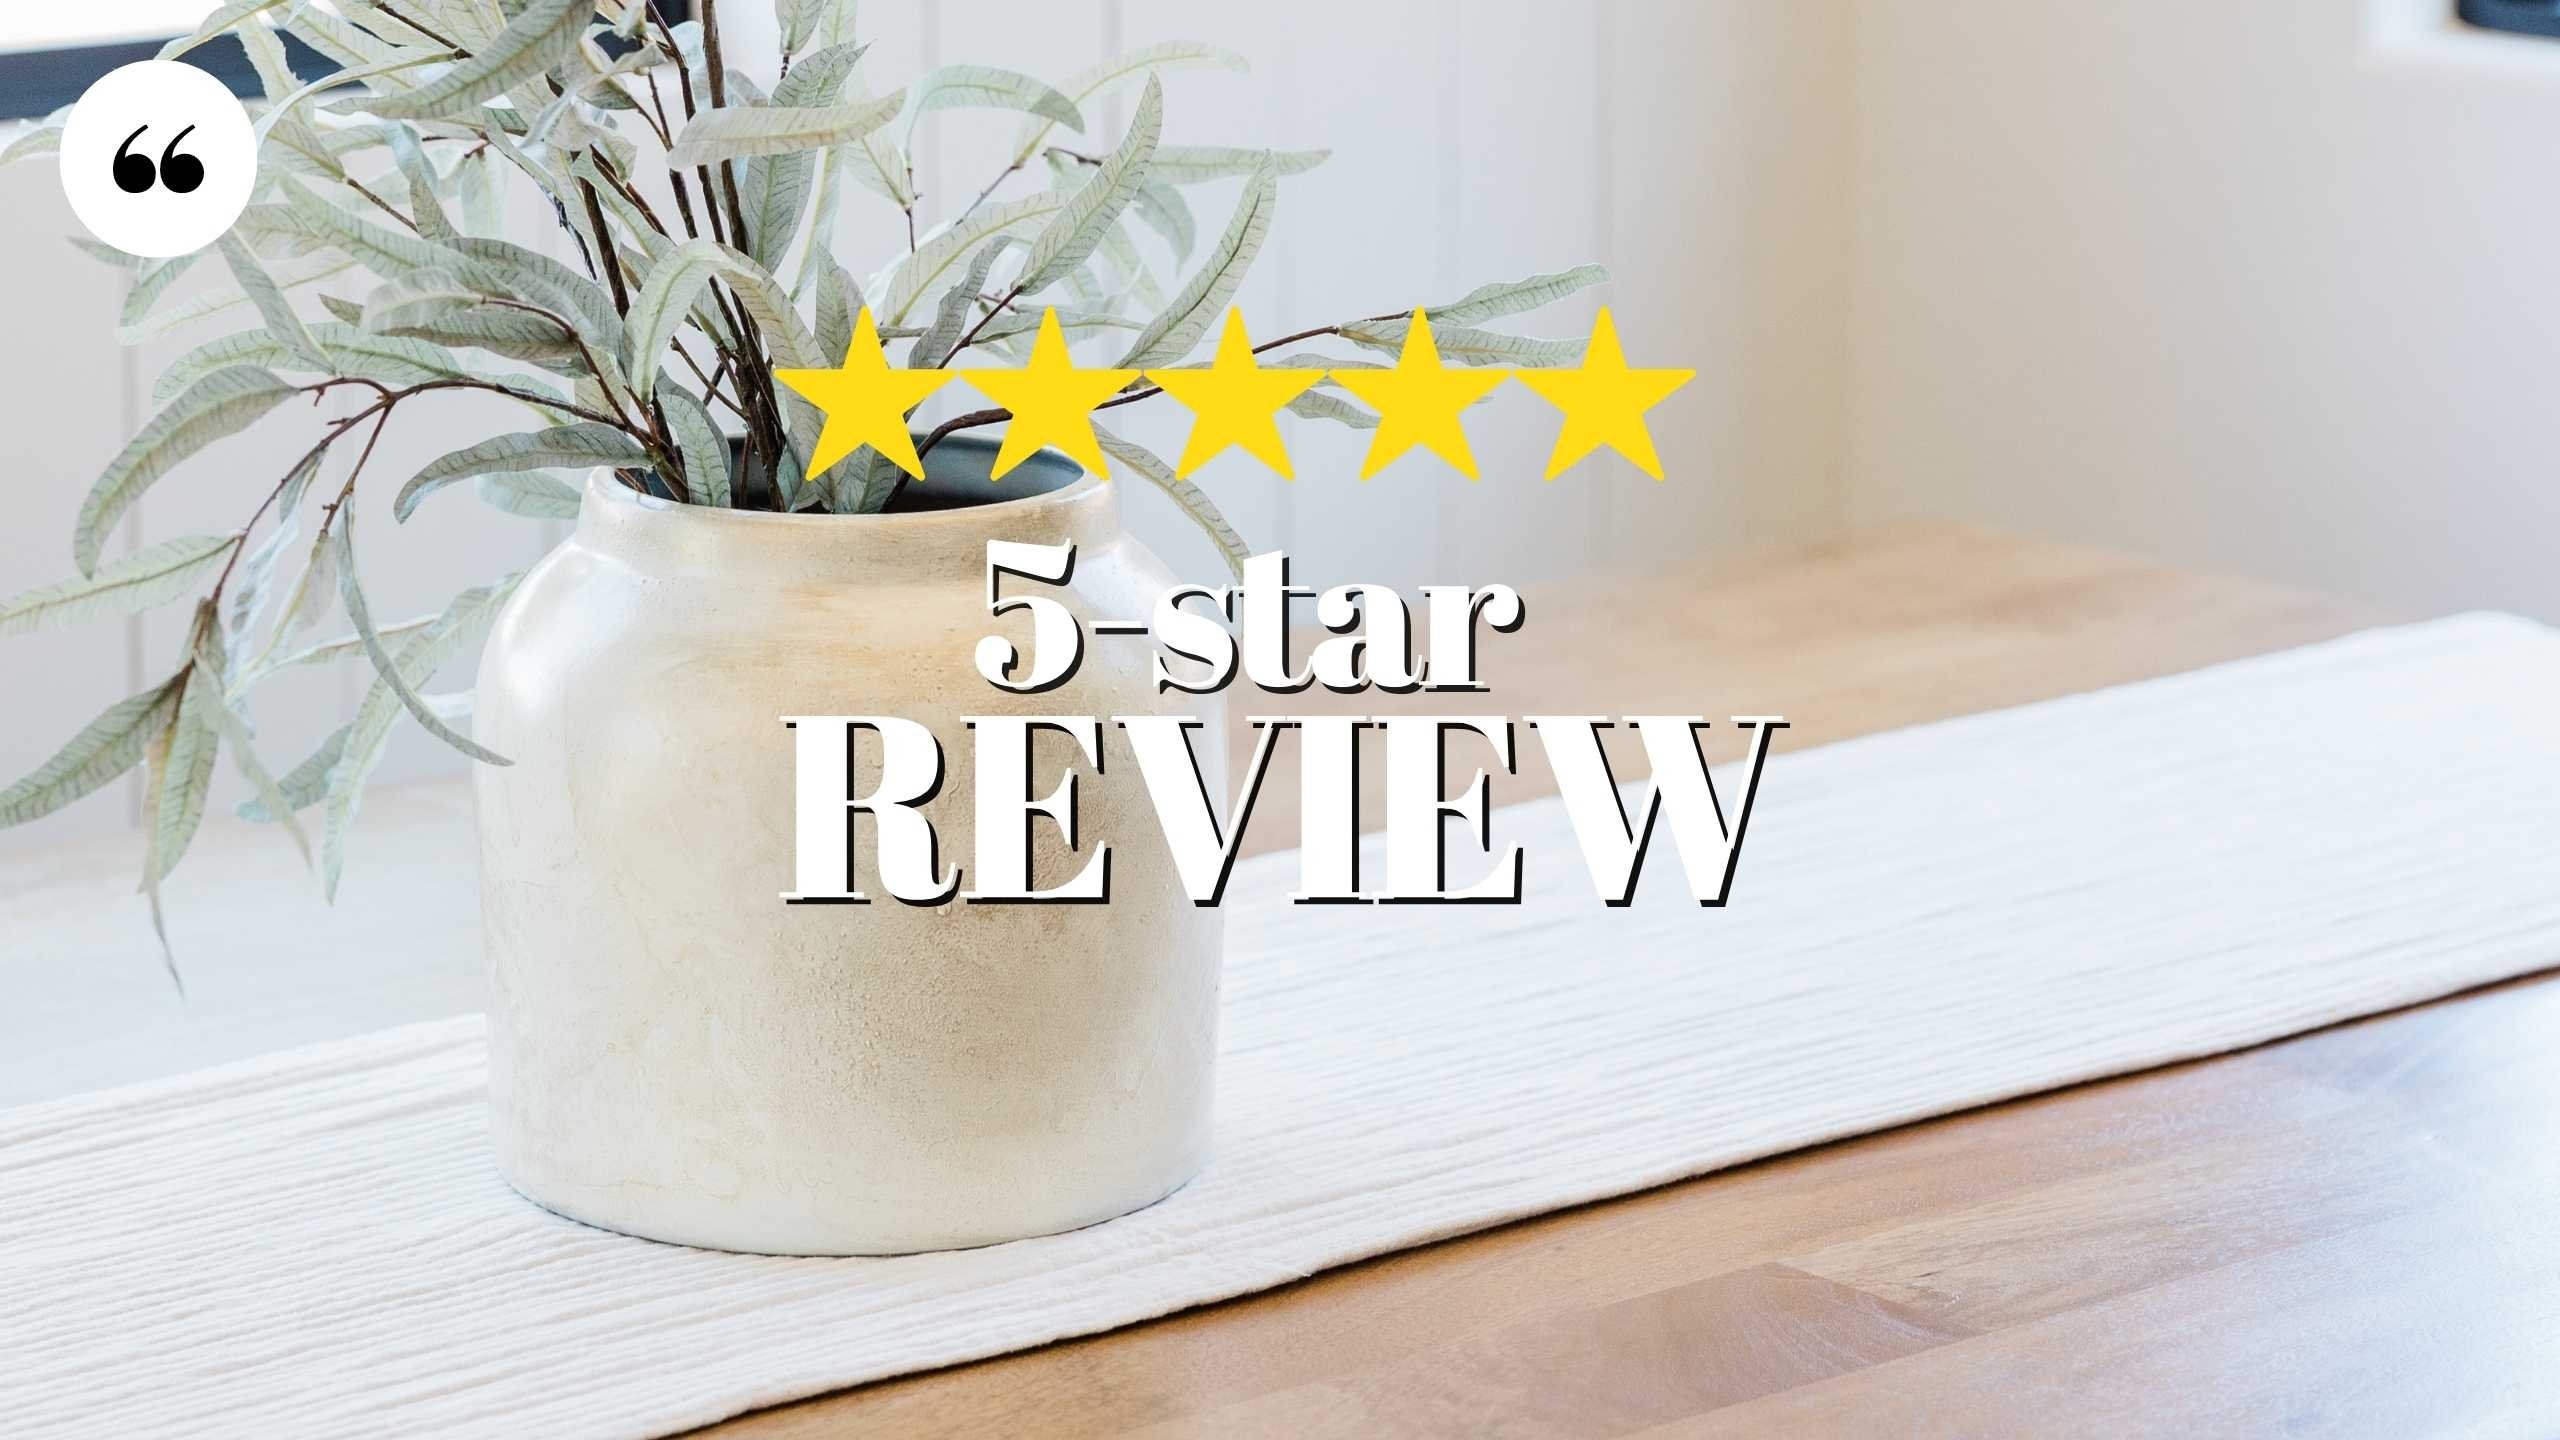 We Helped This Reviewer Sell His Home – Atlanta, GA